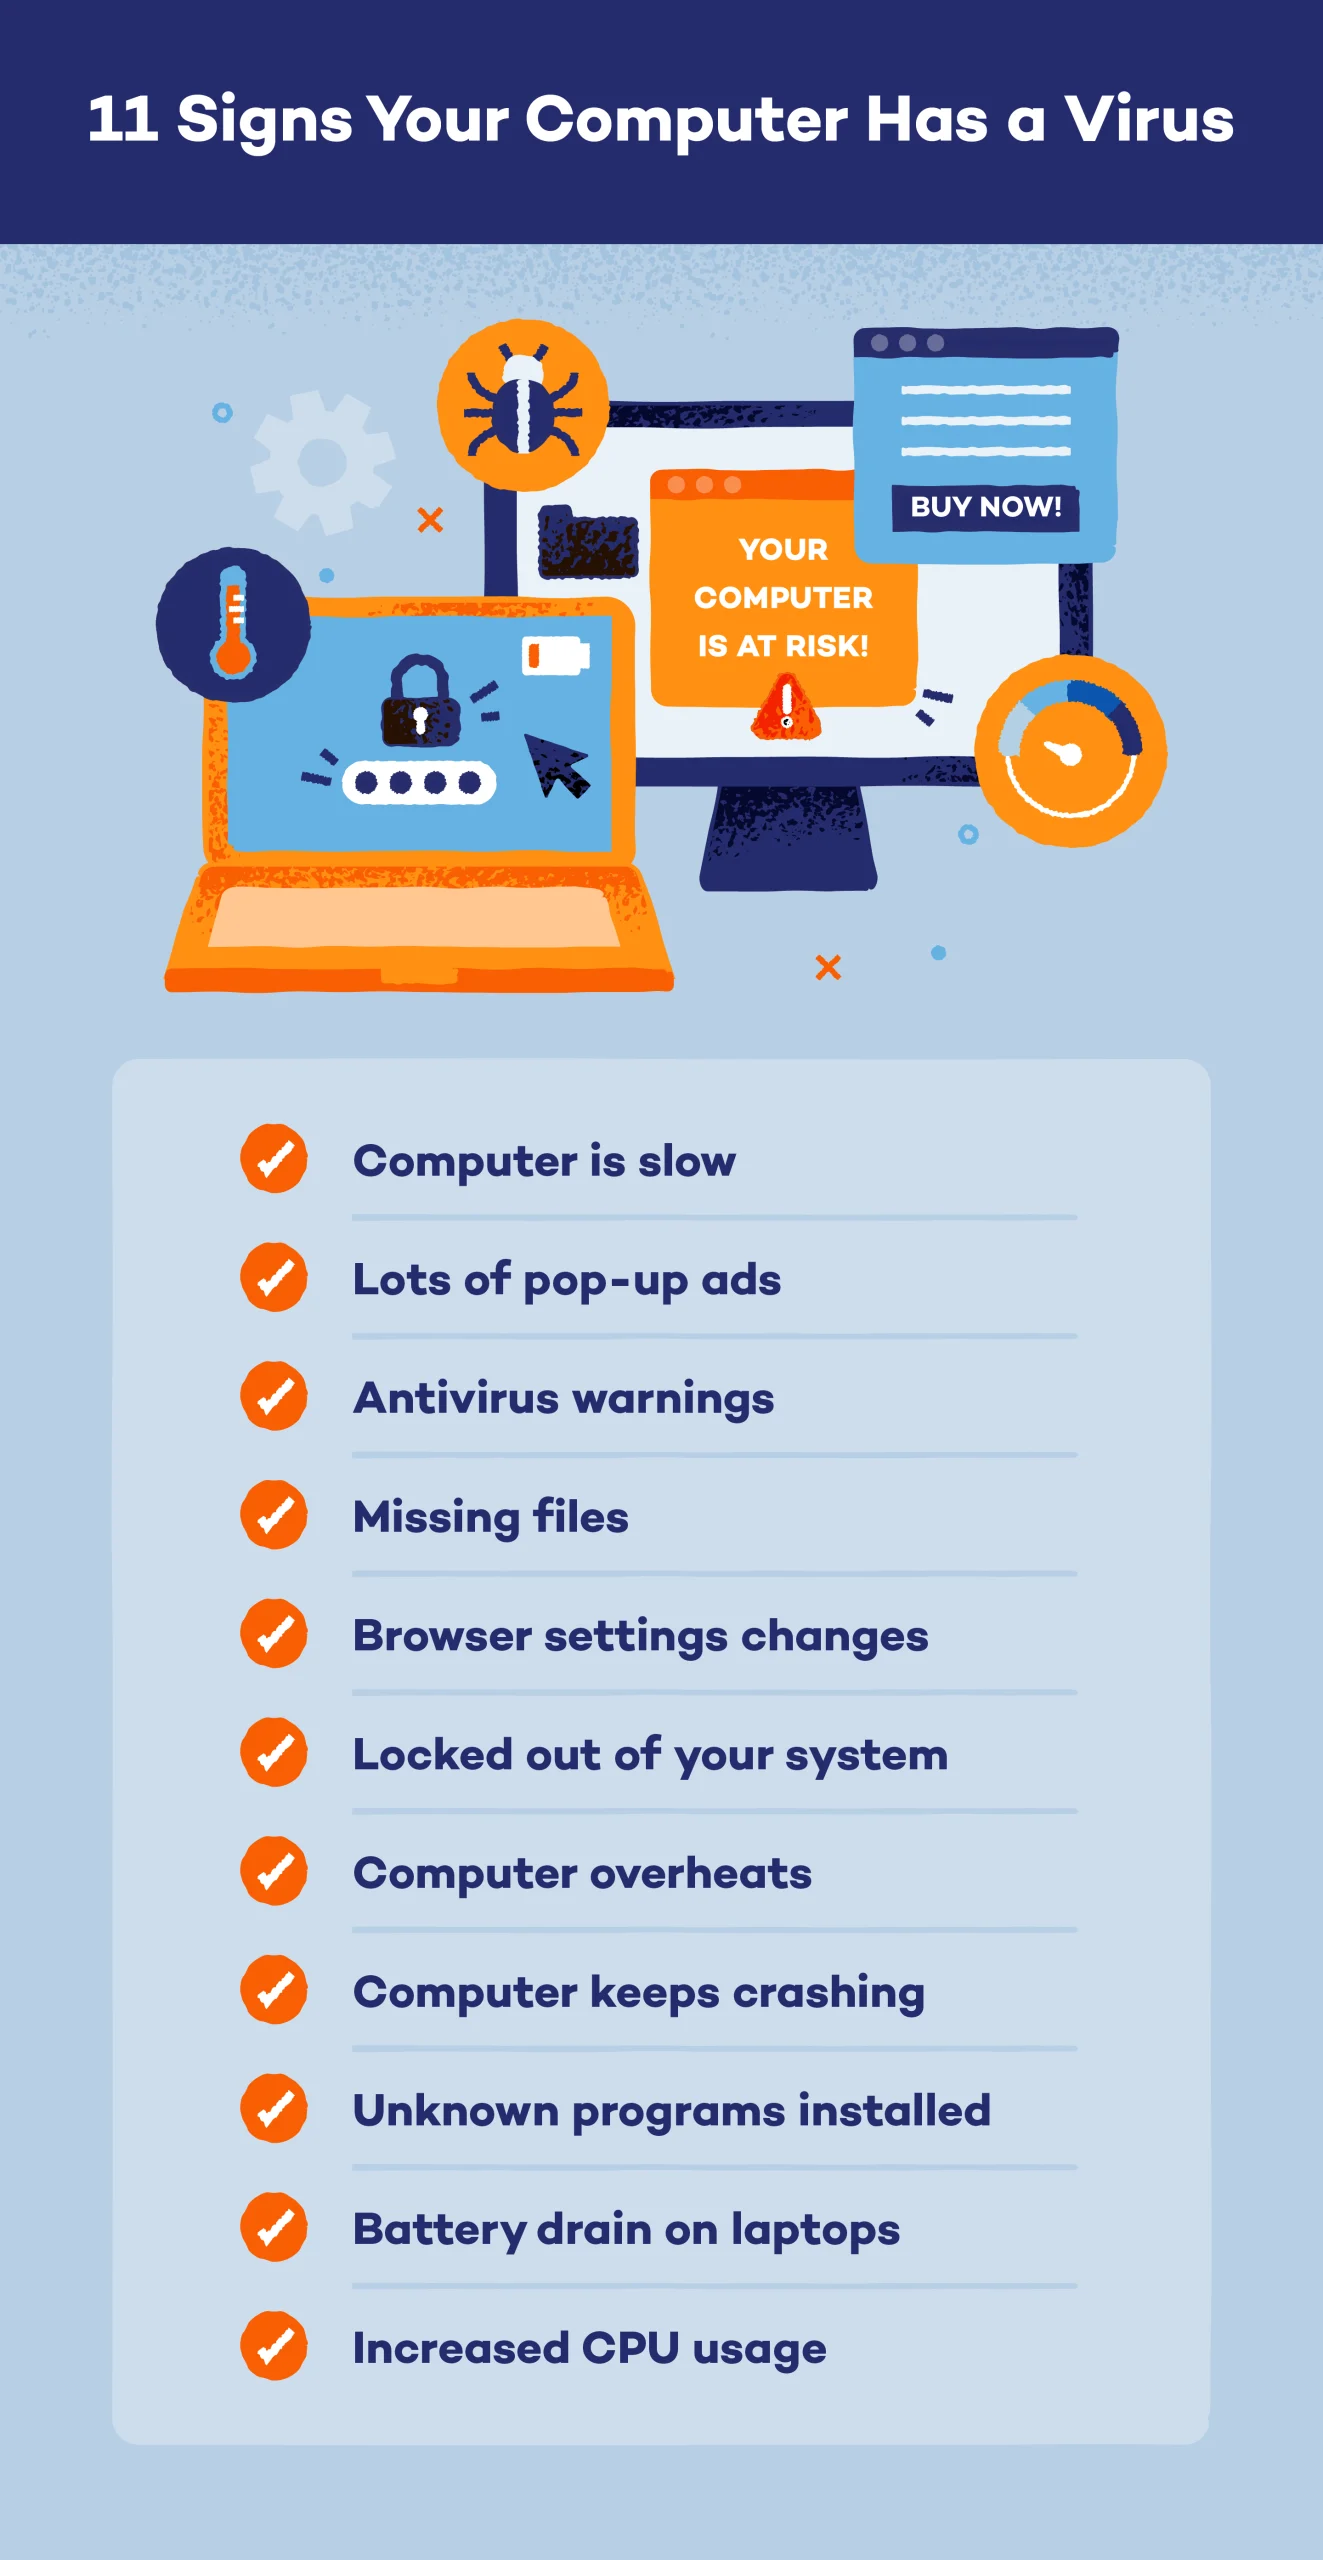 Illustration showing 11 signs of computer virus